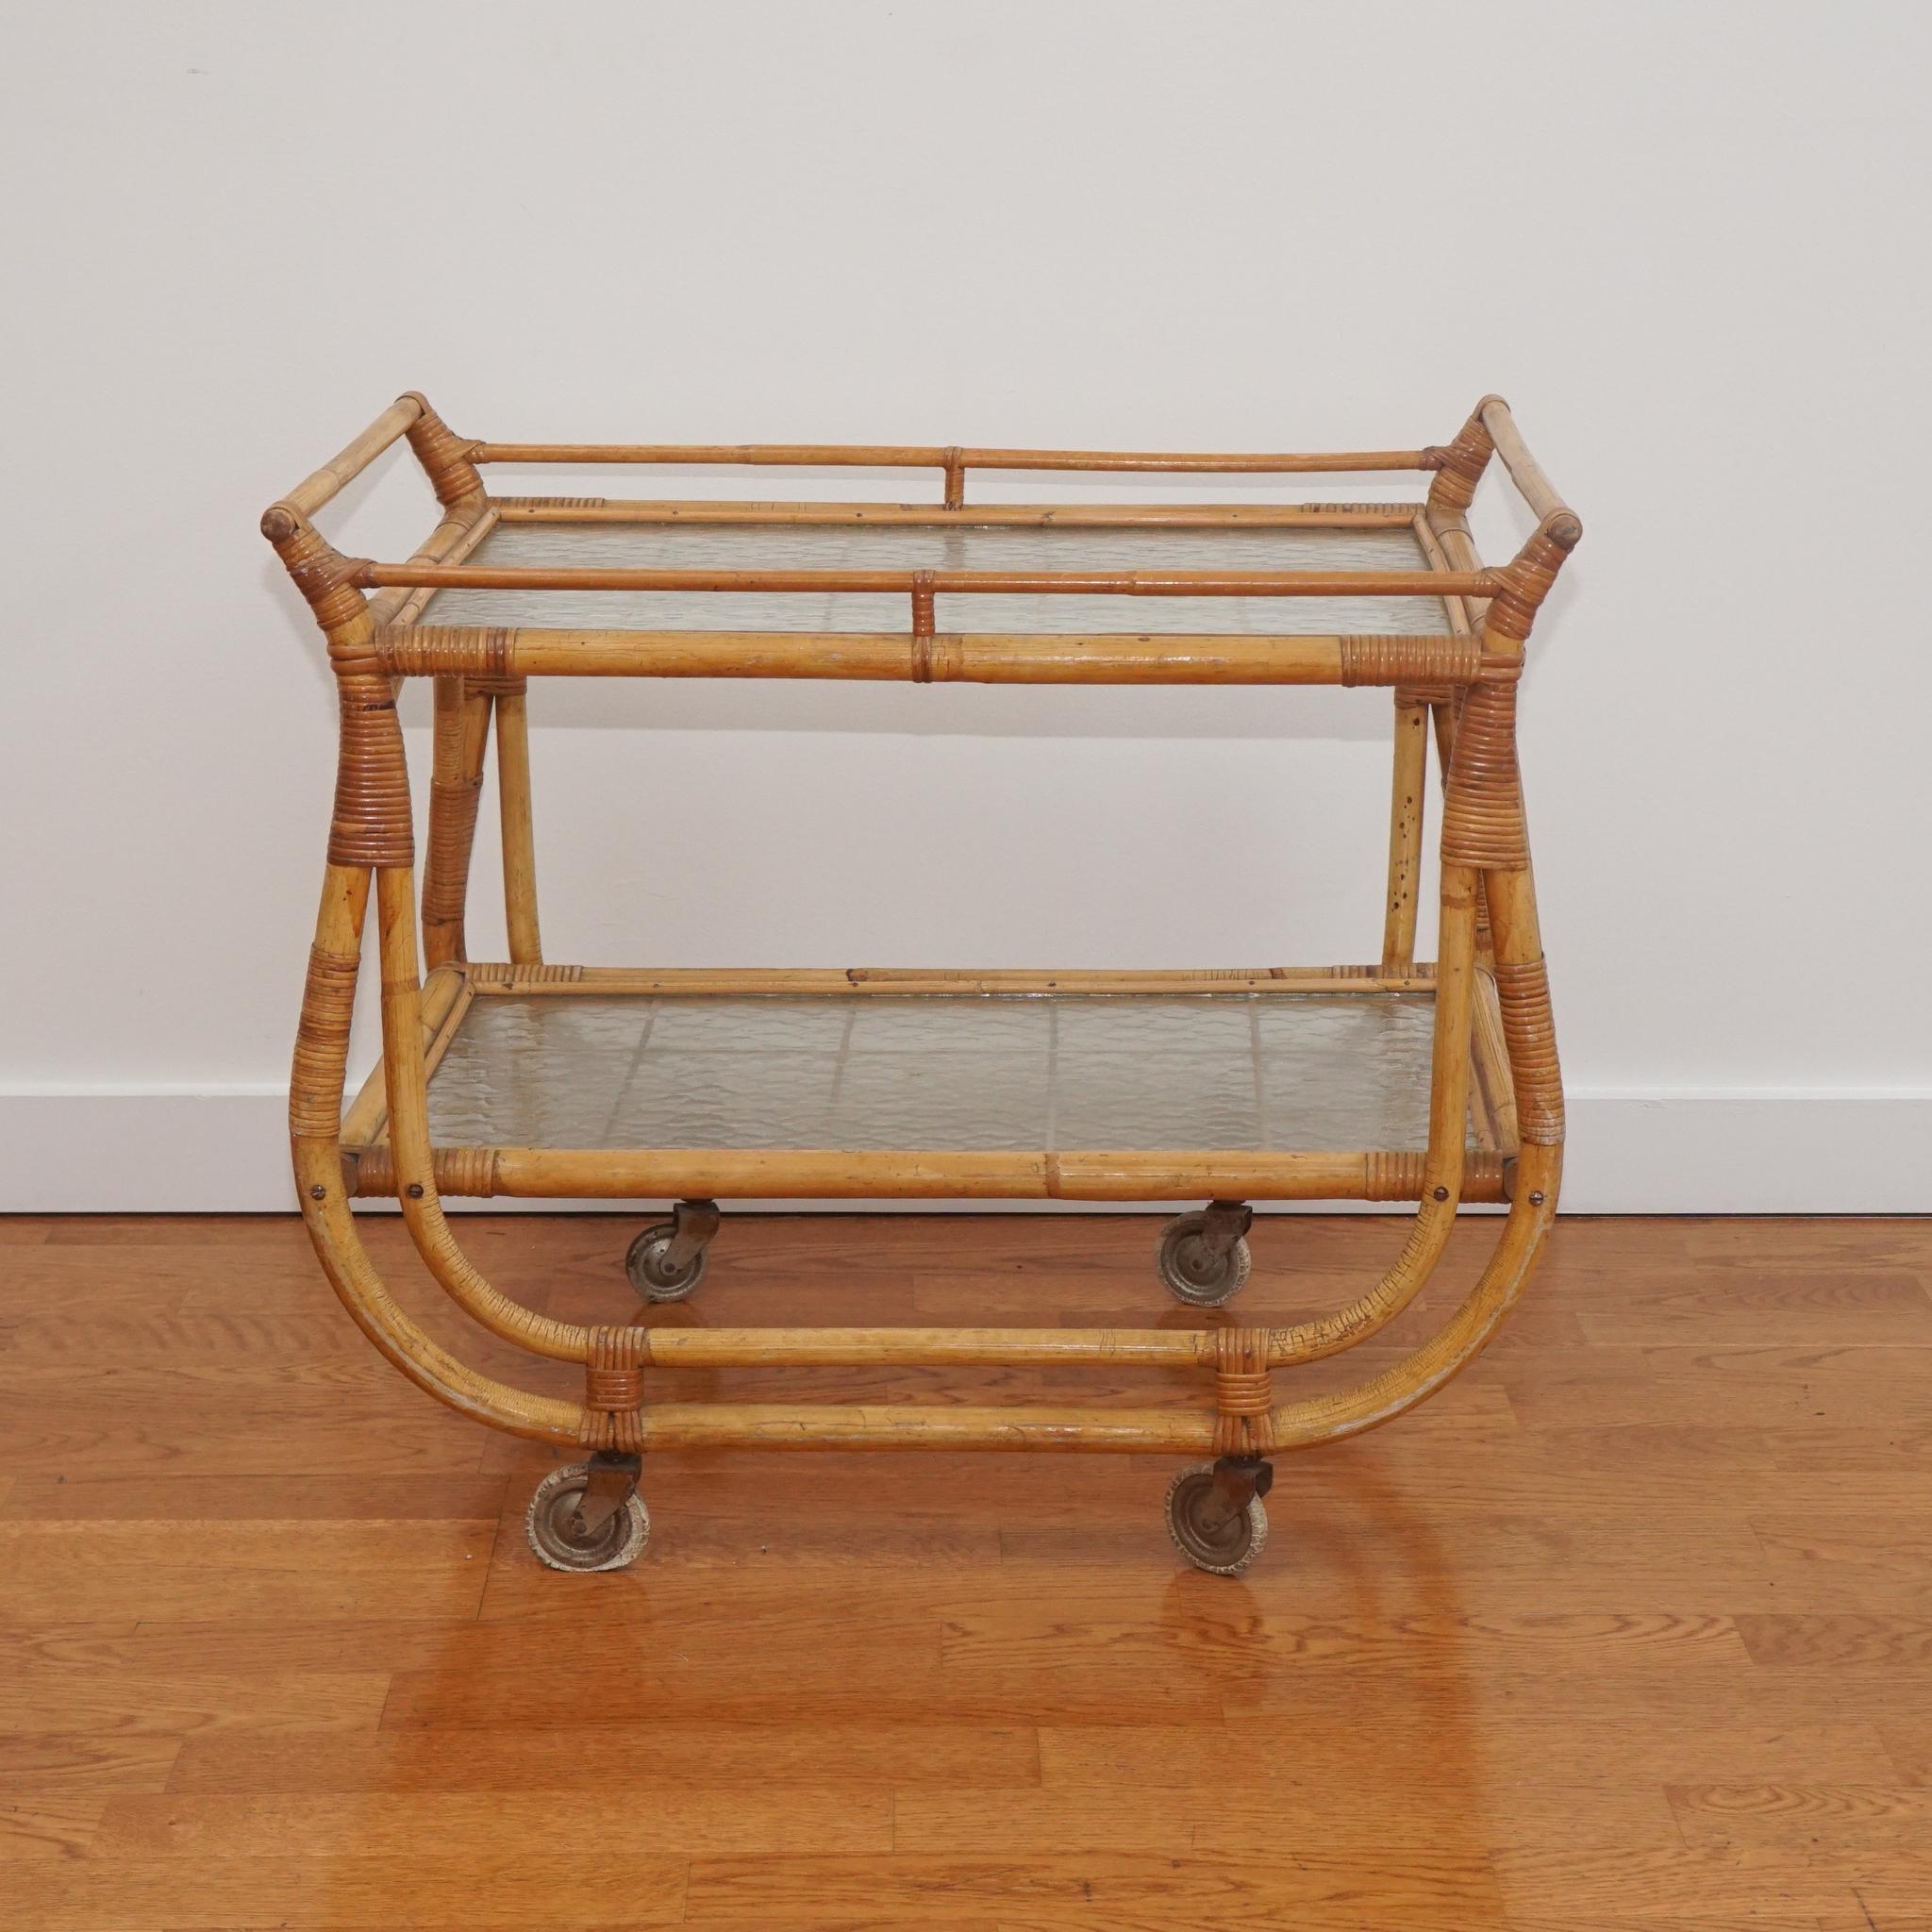 This Mid-Century Modern French bamboo and rattan bar cart is from the 1950s. 
Designed with two grid-patterned glass shelves, the stylish frame is in very good condition and exhibits the warm patina and variation of color that comes with age. The